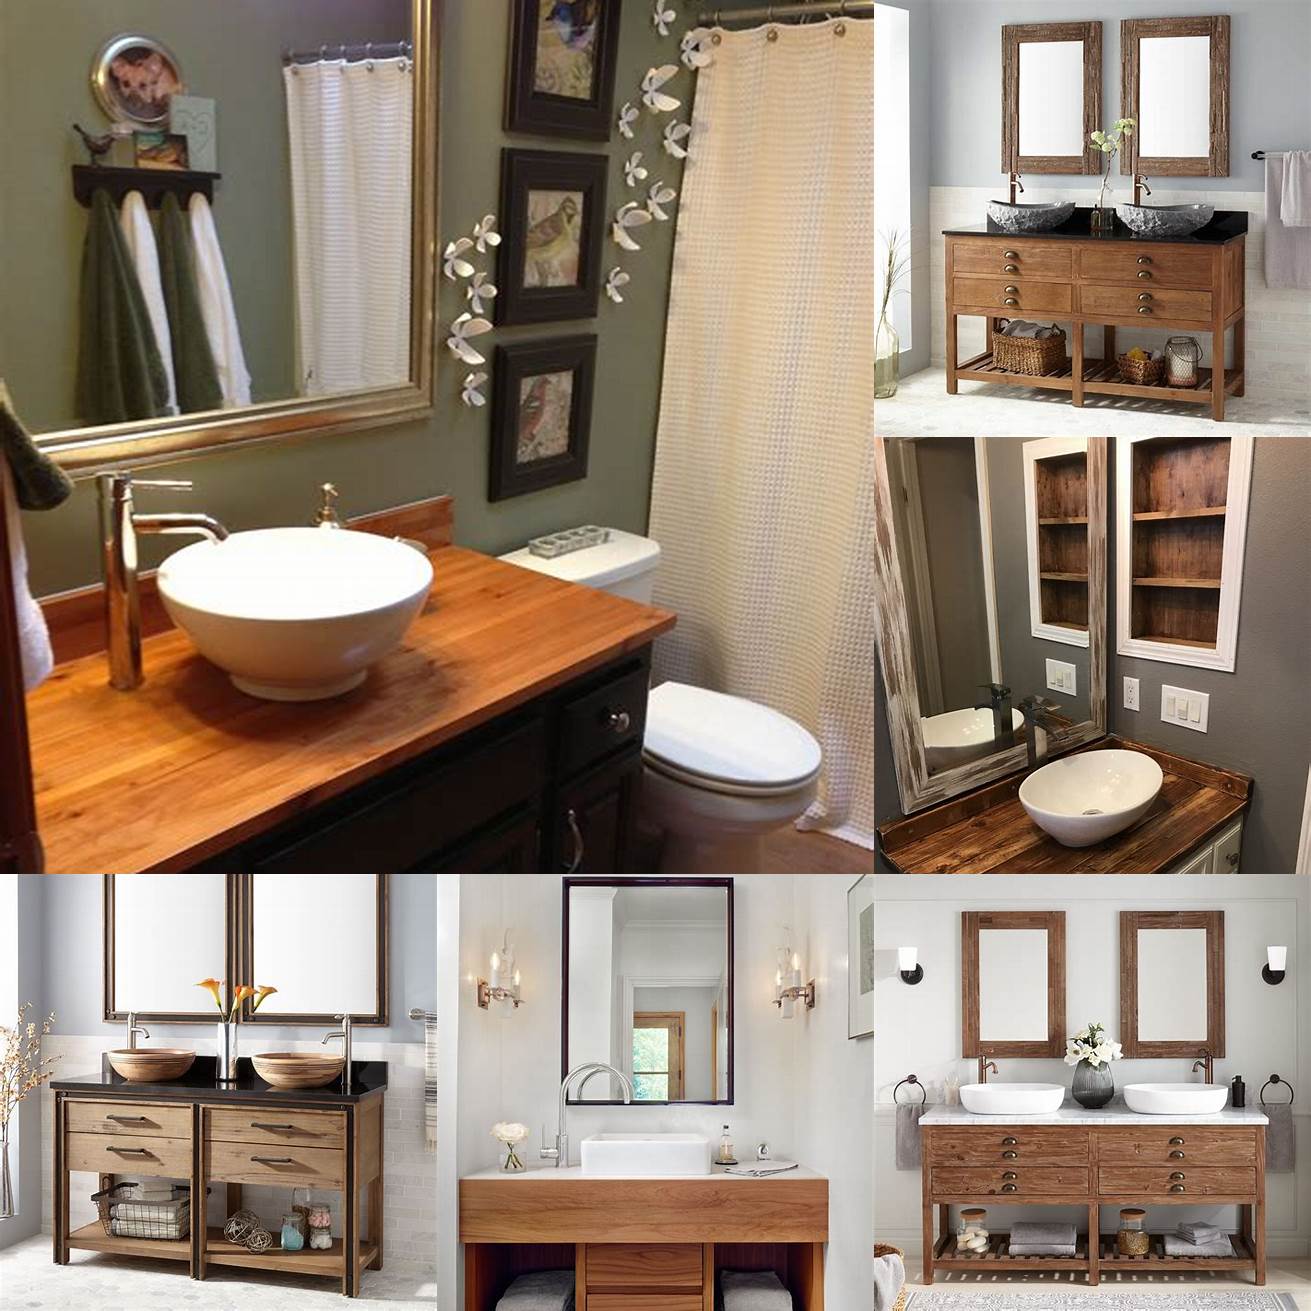 A vessel sink vanity with a wooden countertop